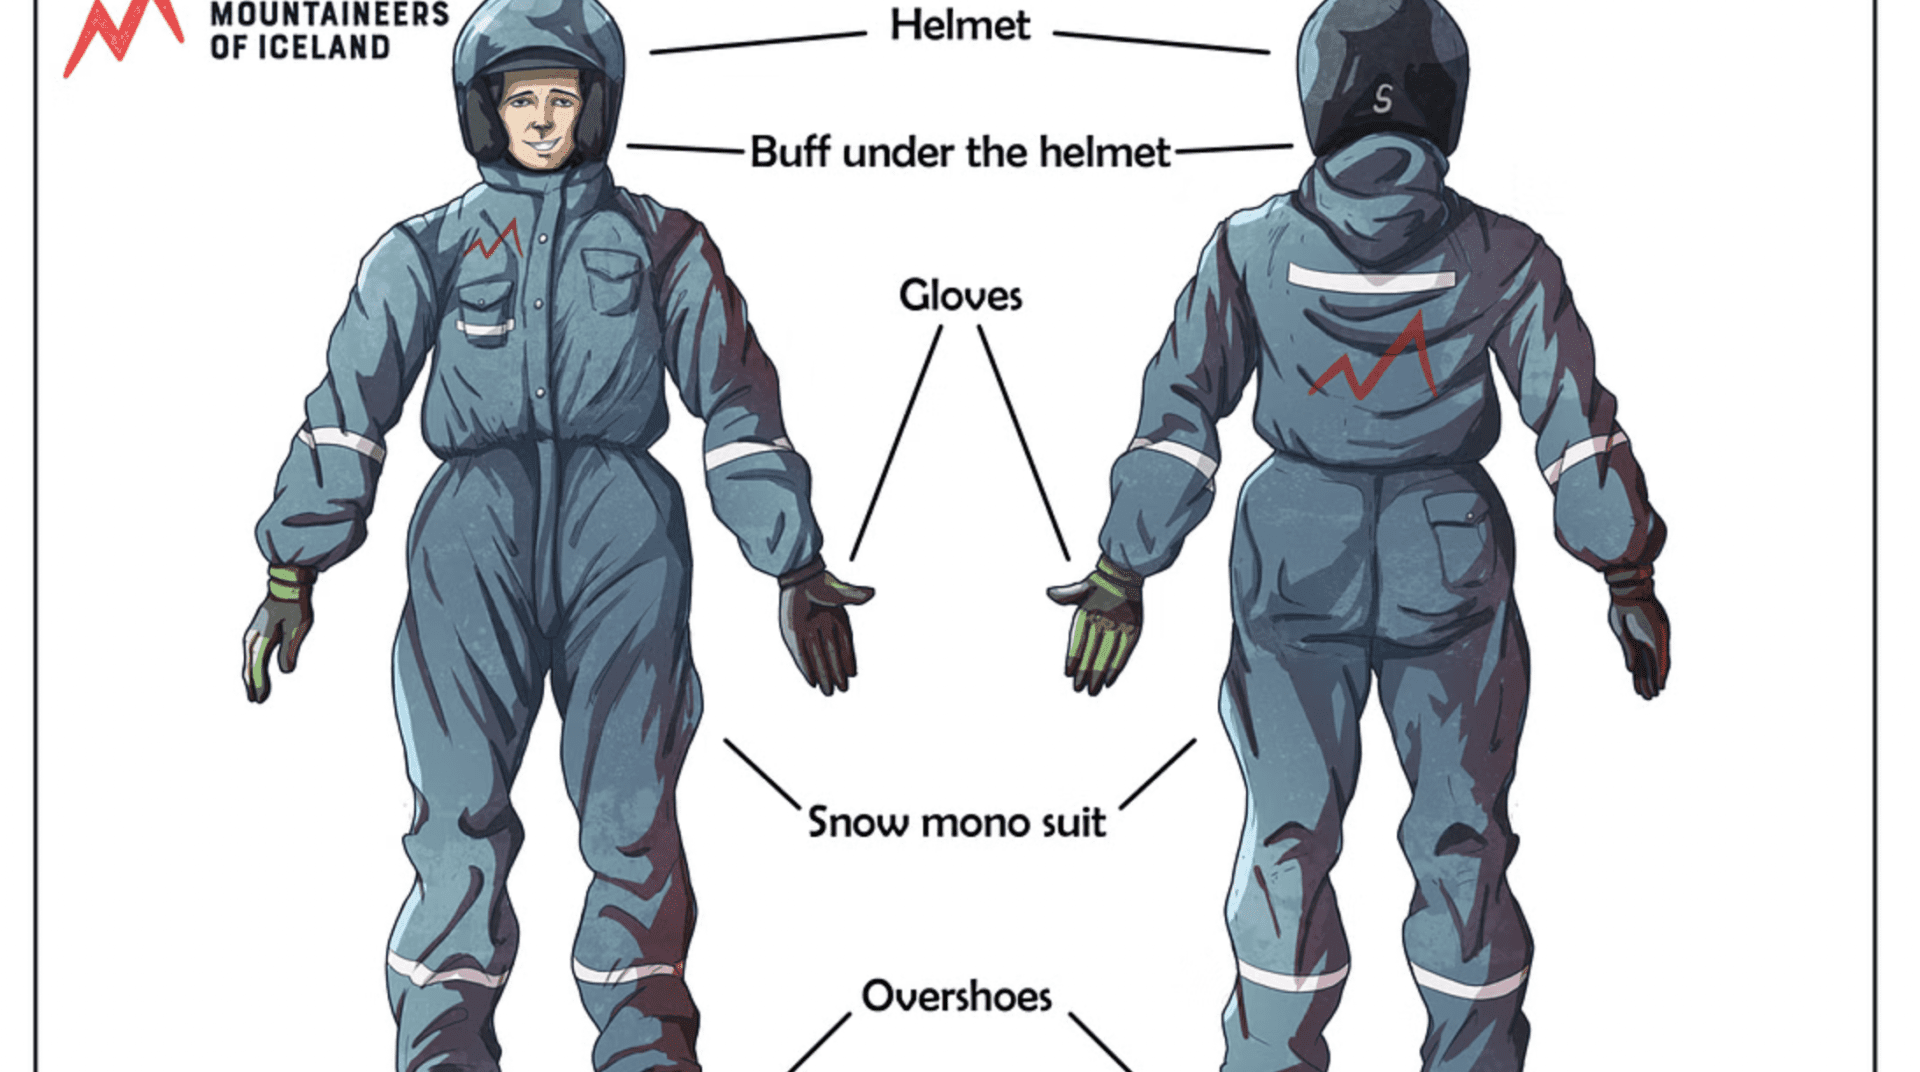 Snowmobile overalls are provided by the tour operator